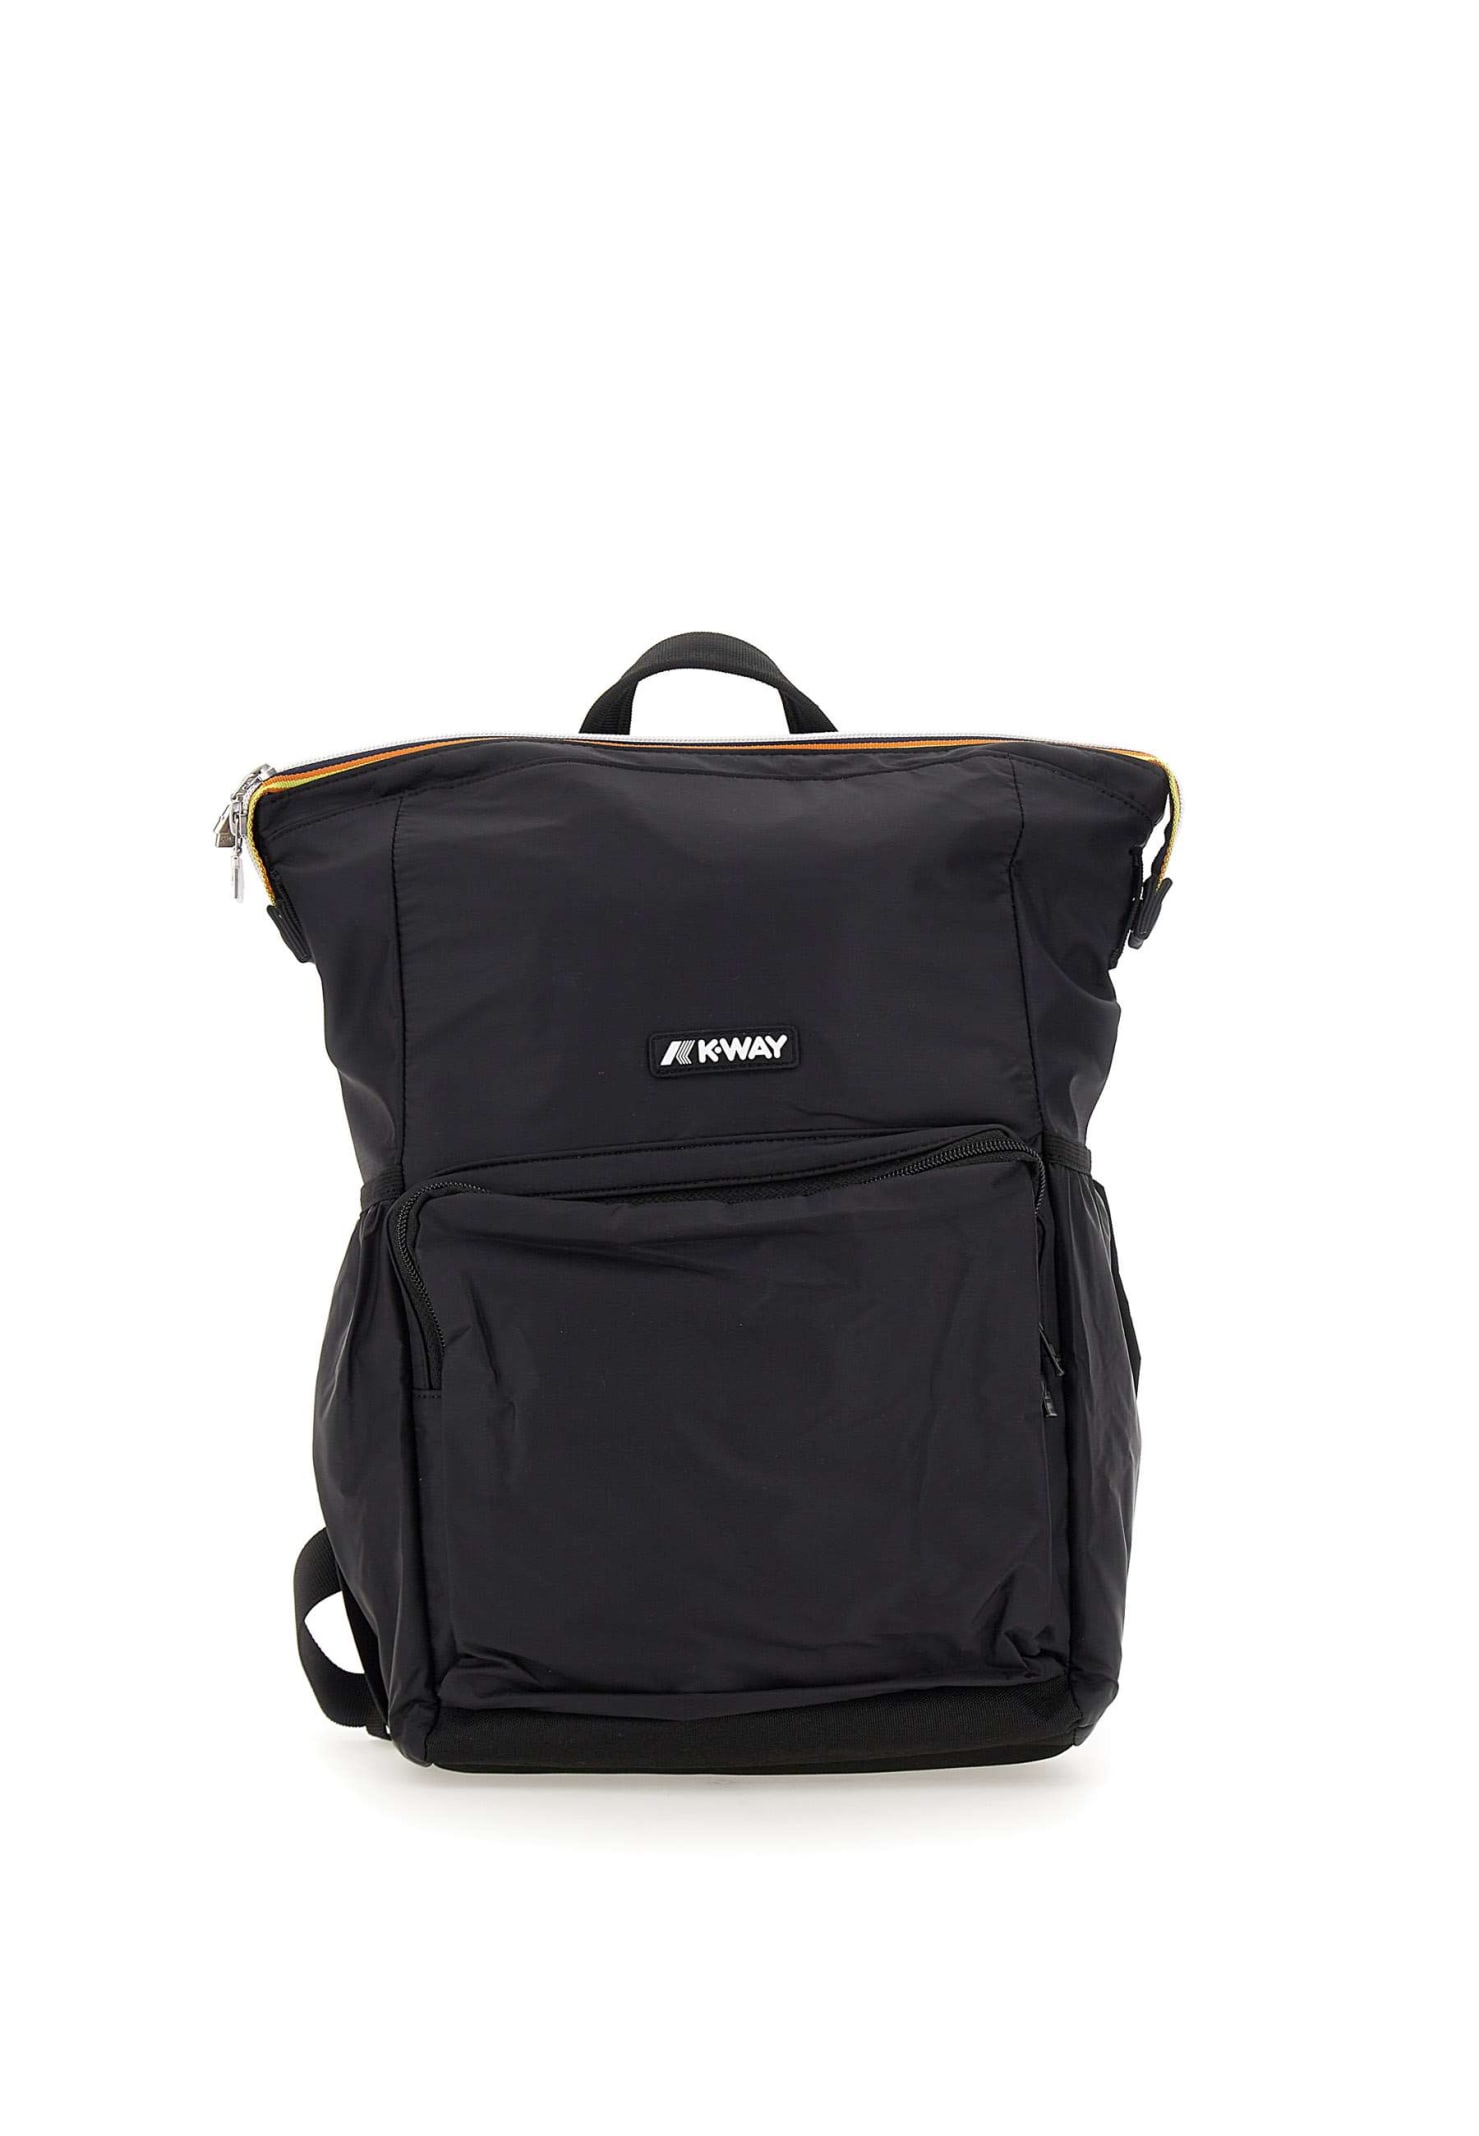 K-way Maizy Backpack In Black Pure